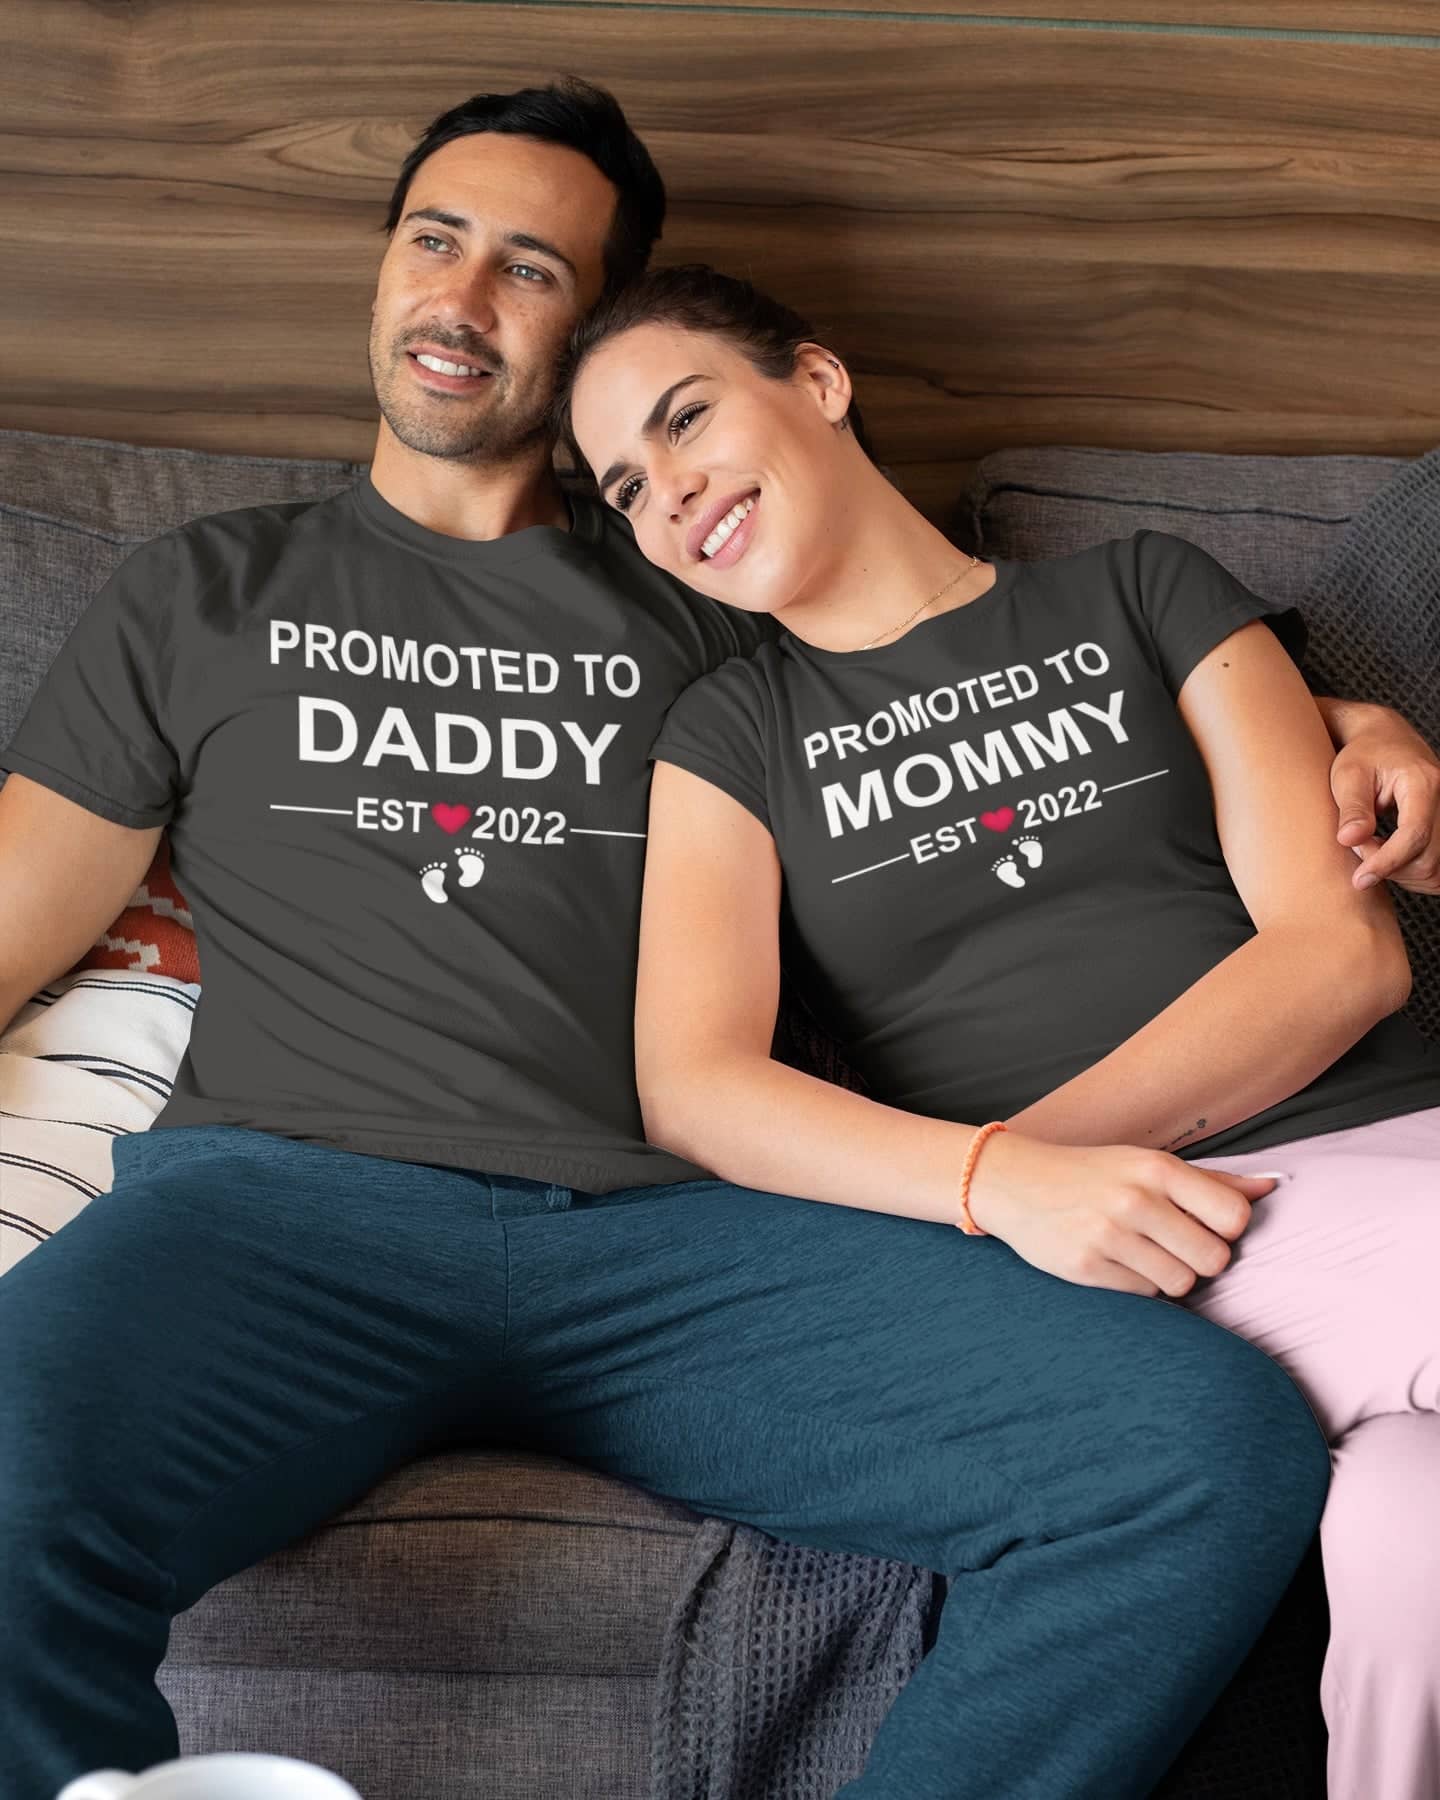 Promoted to Mommy Est. 2022 Special T Shirt for Women freeshipping - Catch My Drift India